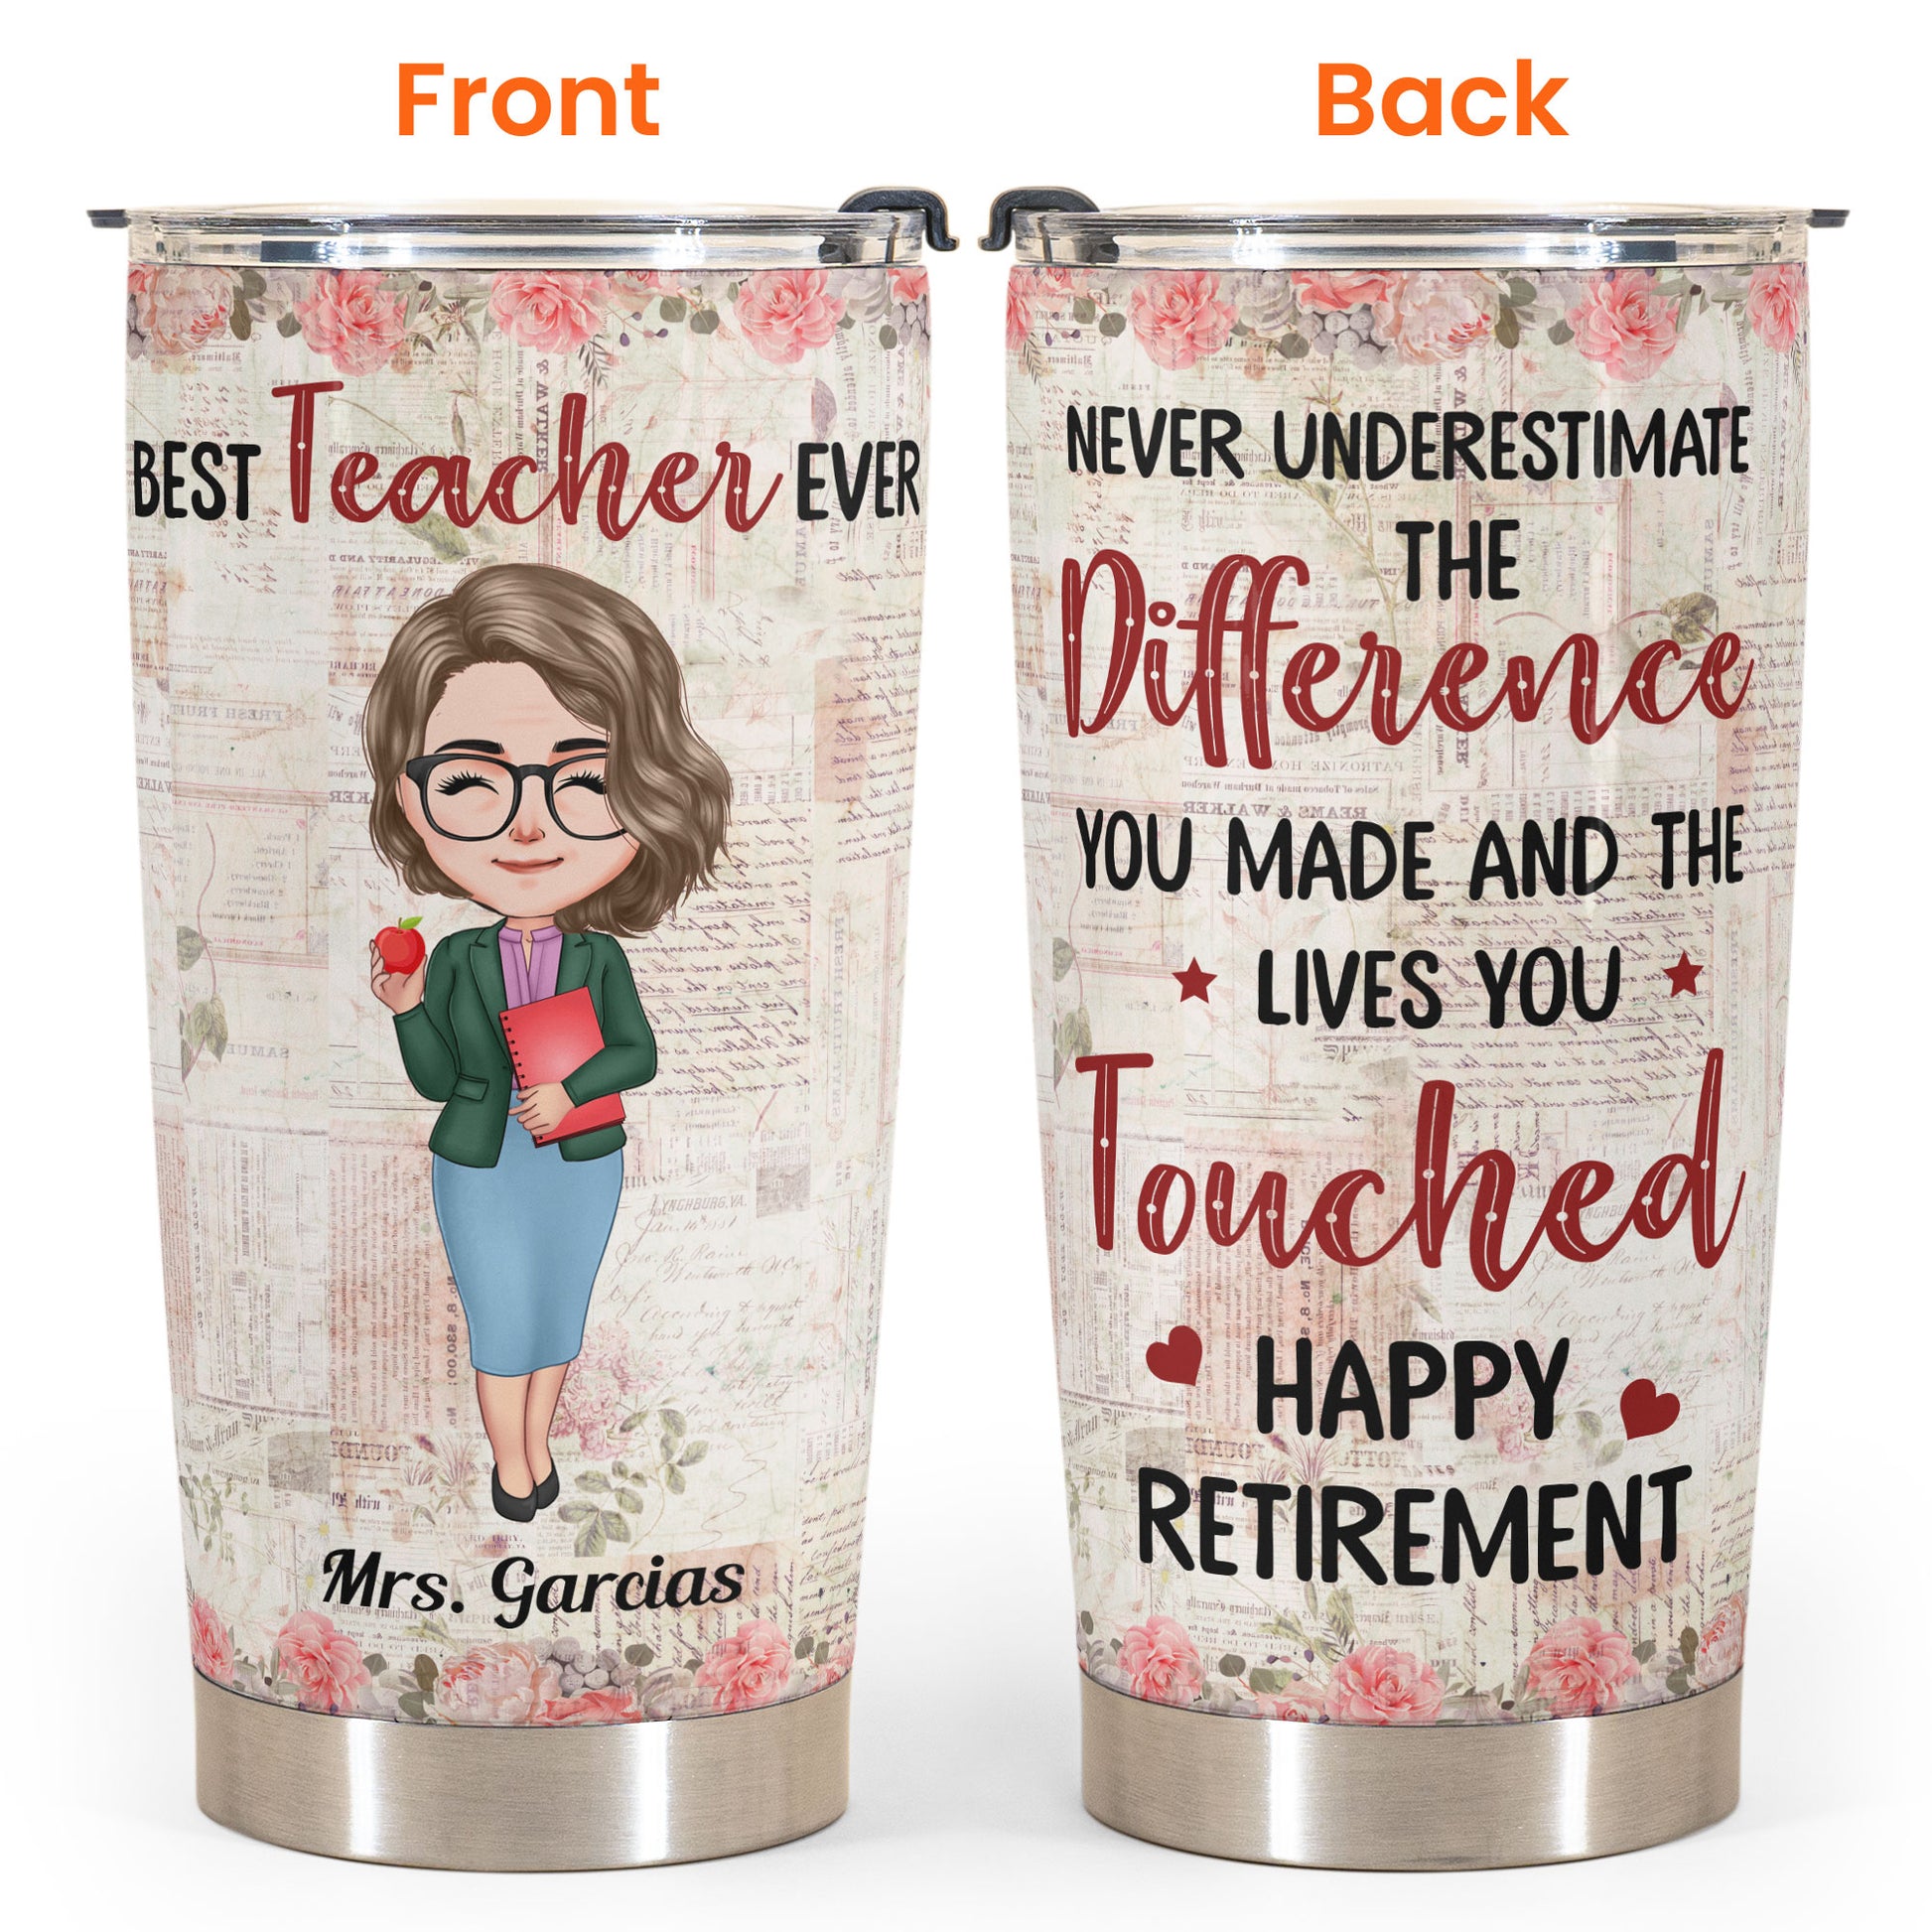 Happy Retirement To The Best Teacher Ever - Personalized Tumbler Cup - Retirement, Leave Work, Year End Gift For Teachers, Old Teachers, School Workers, Education Workers